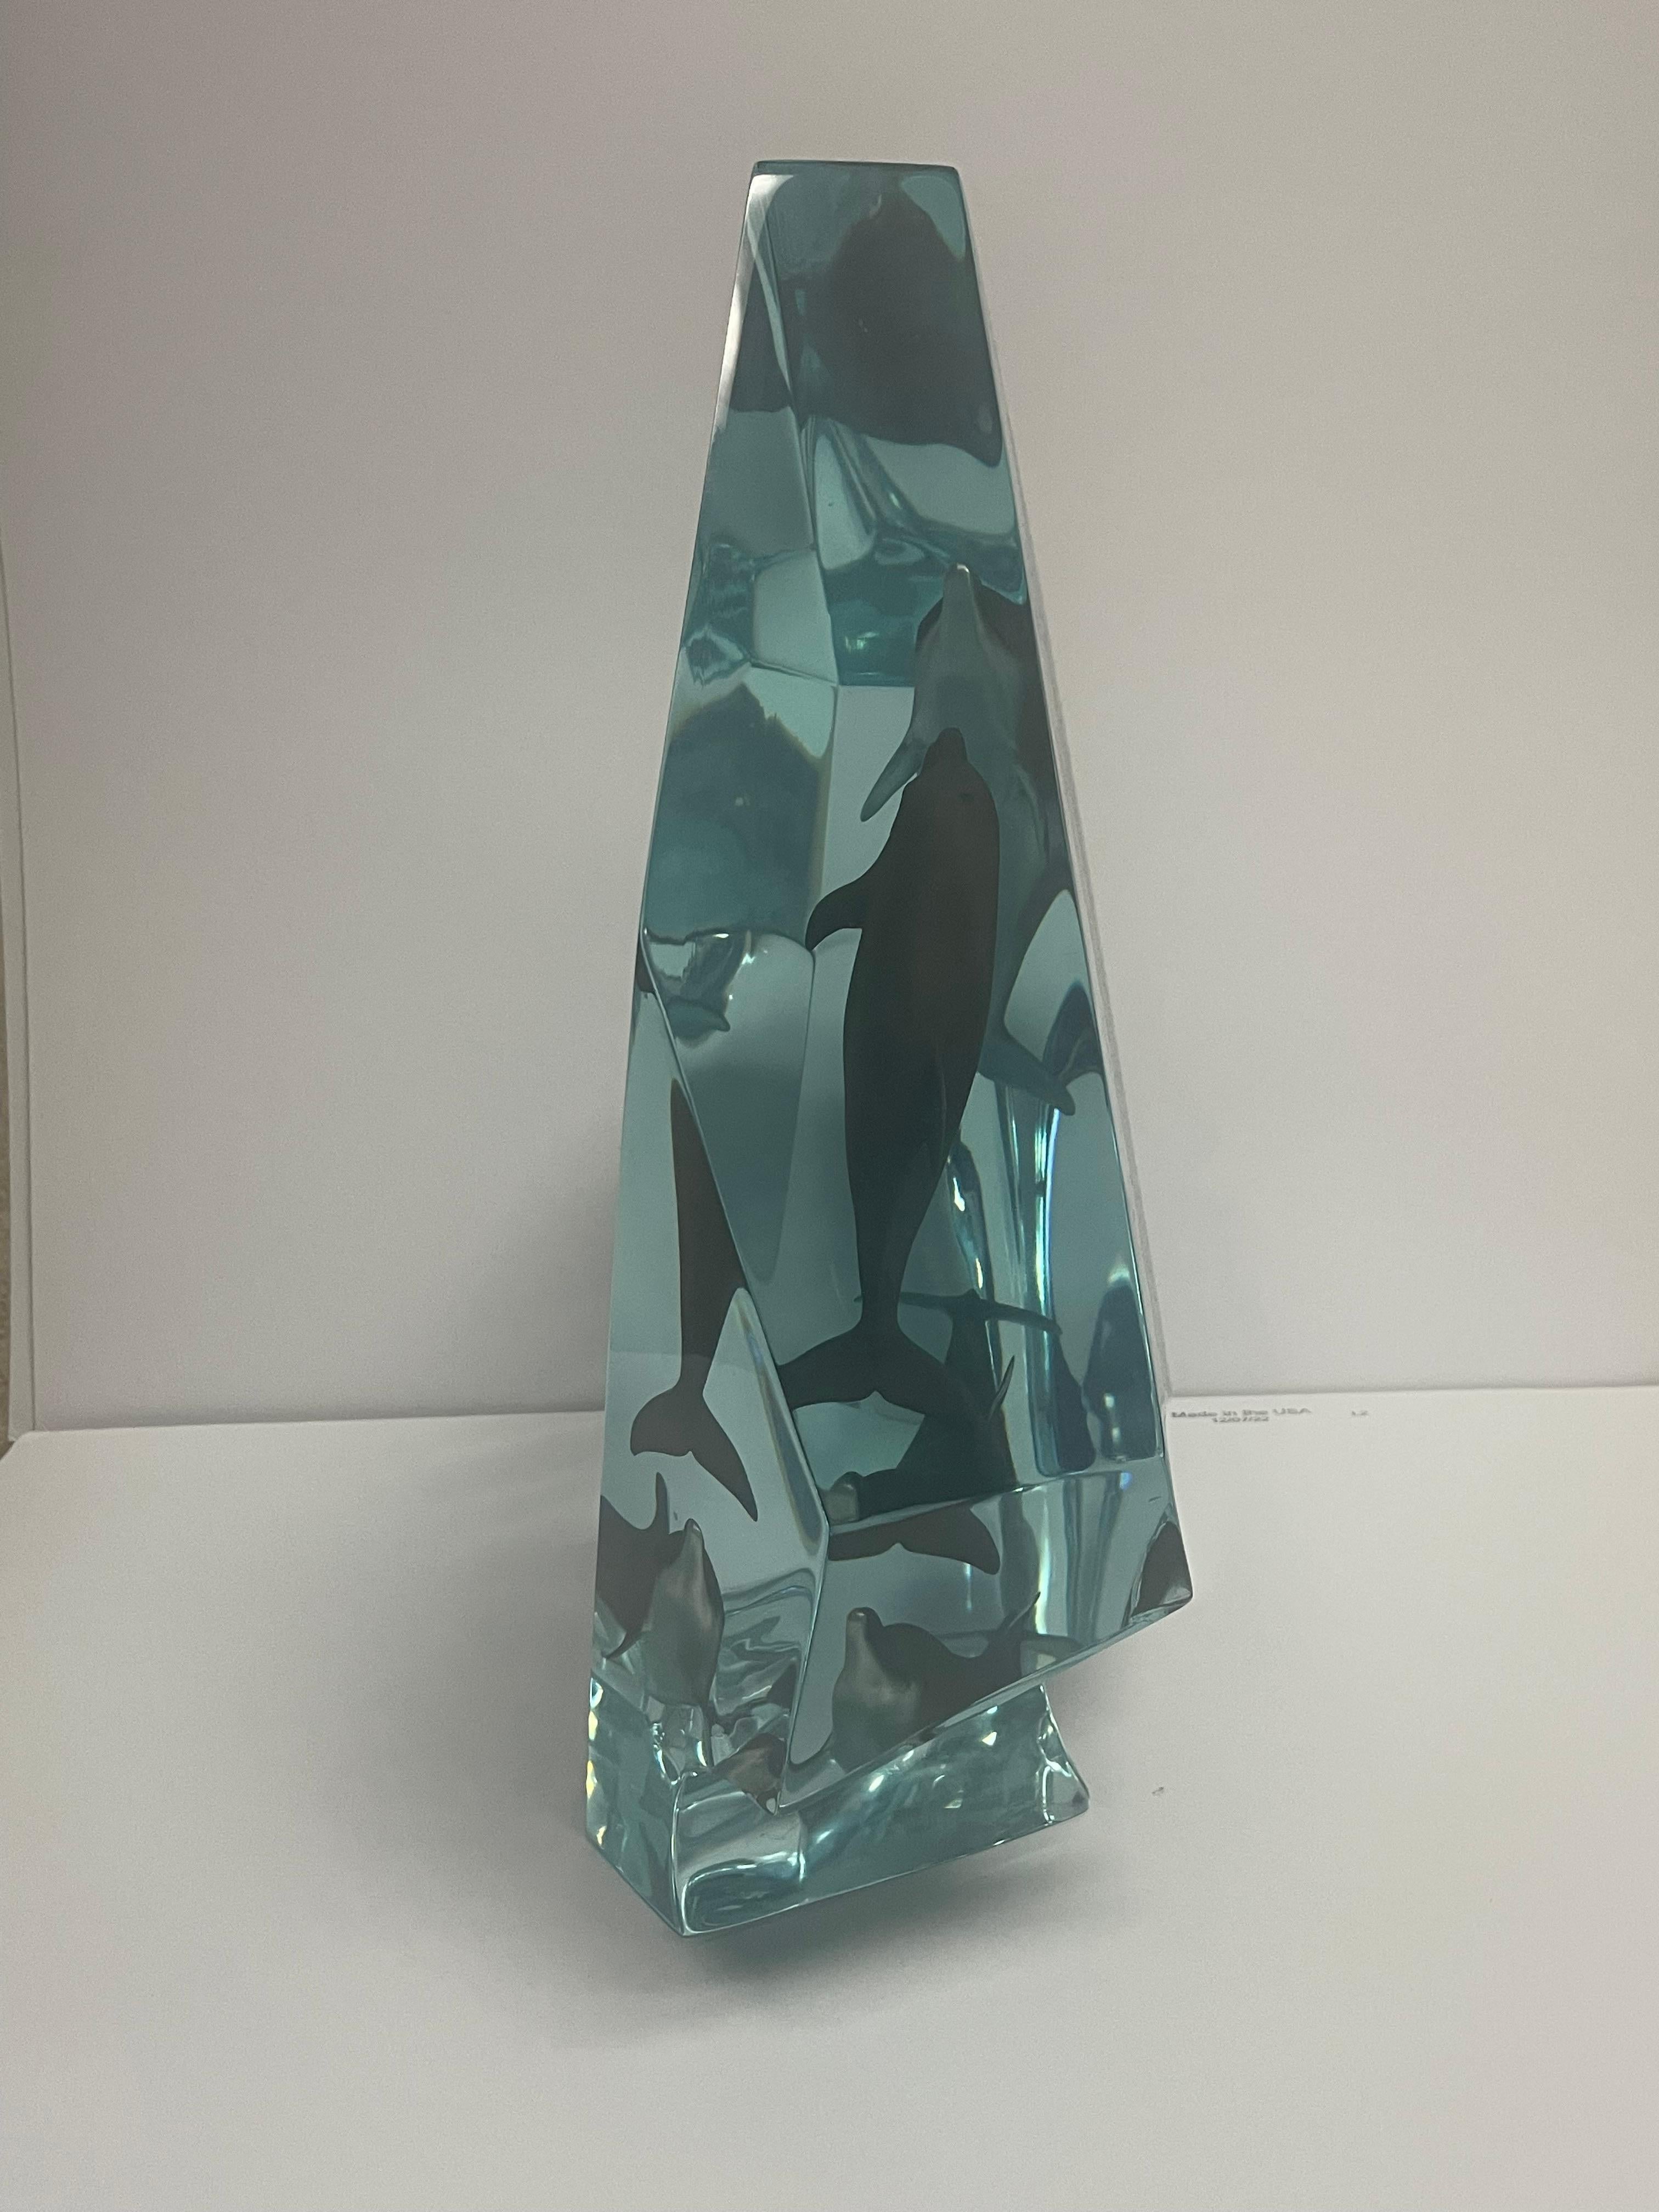 This is an. Robert Wyland “circle of life” acrylic glass sculpture 2002 with coa measures 15x14x5. In excellent condition

